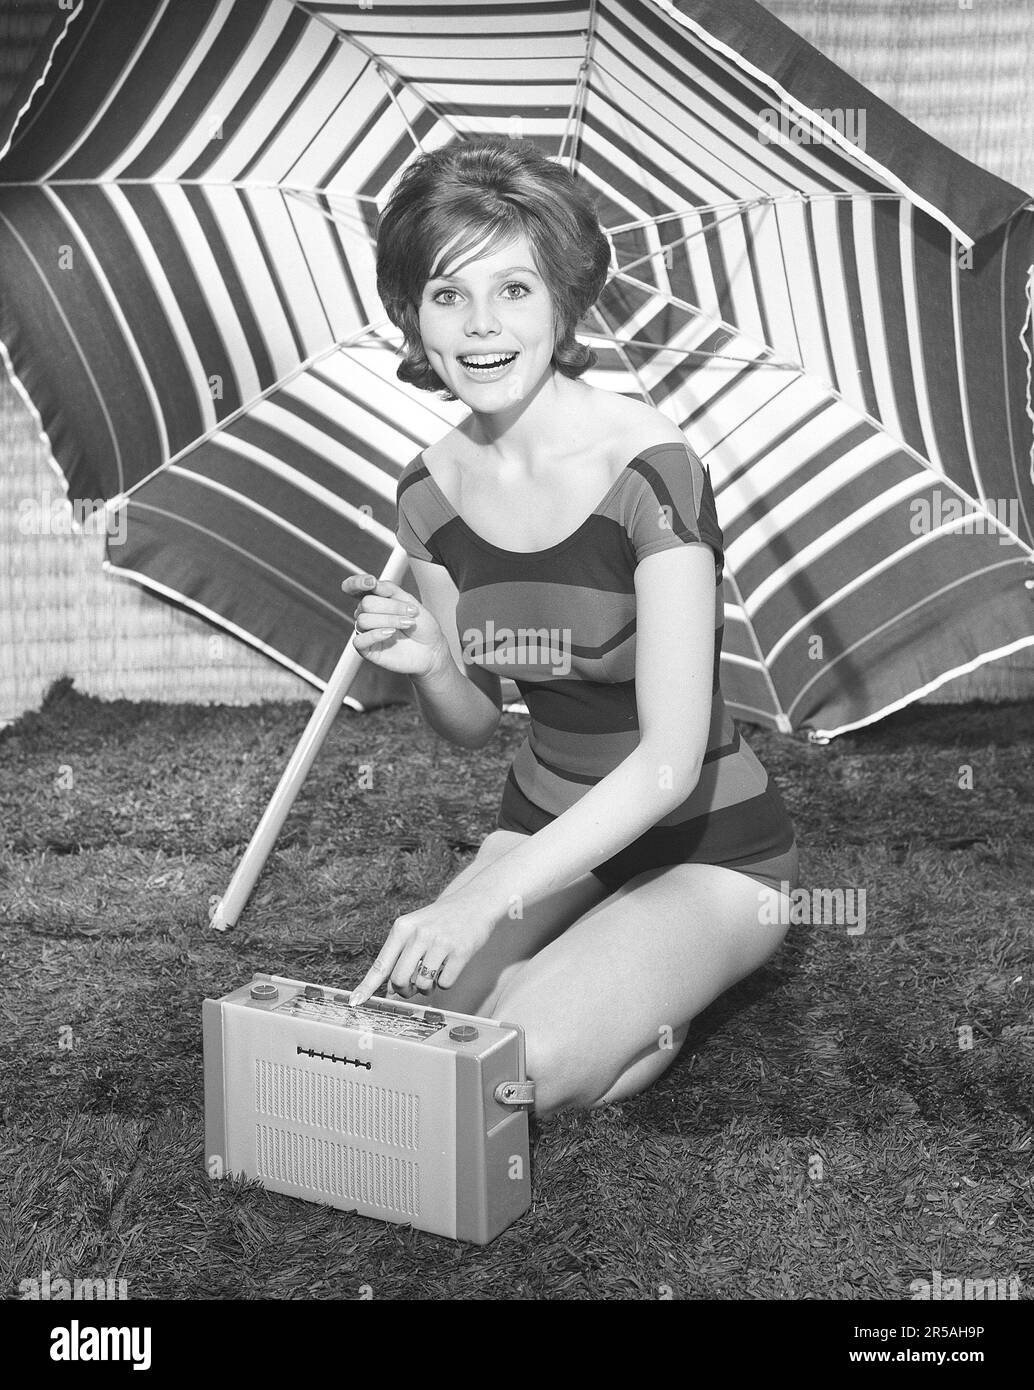 1960s summer lifestyle. A young woman pictured in a photographers studio wearing a bathingsuit with a portable radio. The sunshade parasol in the background is placed there to add to the summer feeling.  Sweden 1960 Photo Kristoffersson Ref CL113-4 Stock Photo